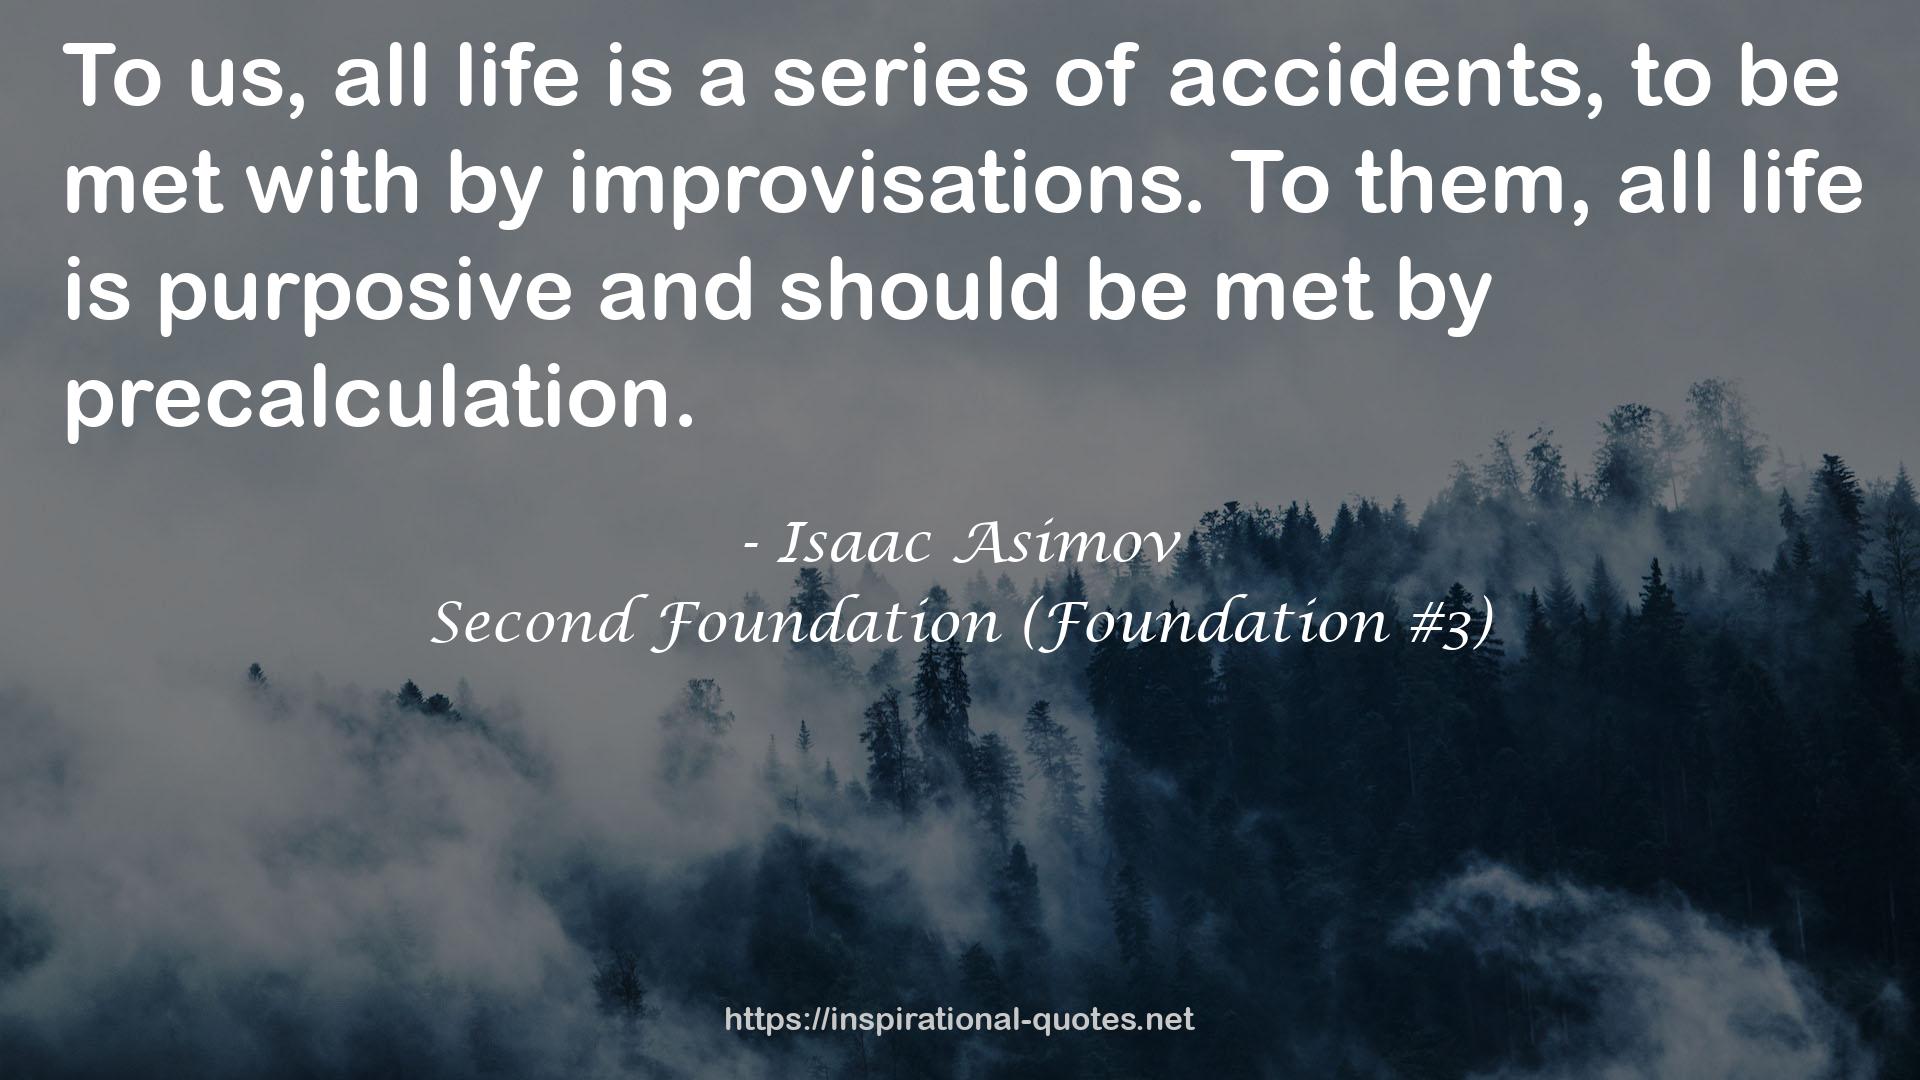 Second Foundation (Foundation #3) QUOTES